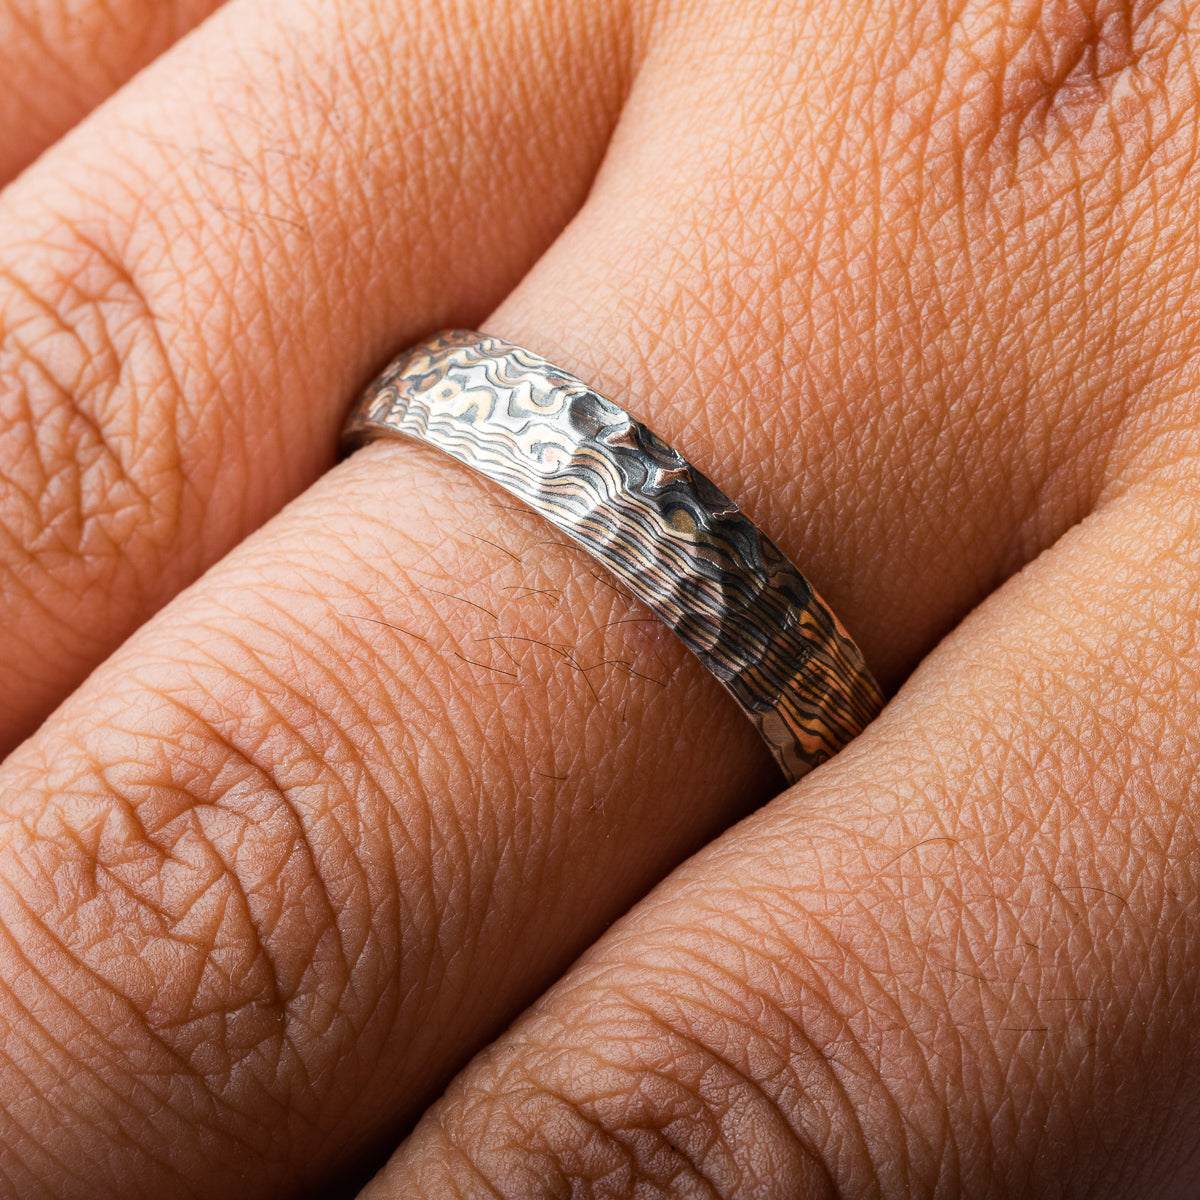 Rugged Firestorm Twist Rings or Wedding Band Set with Hammered Finish